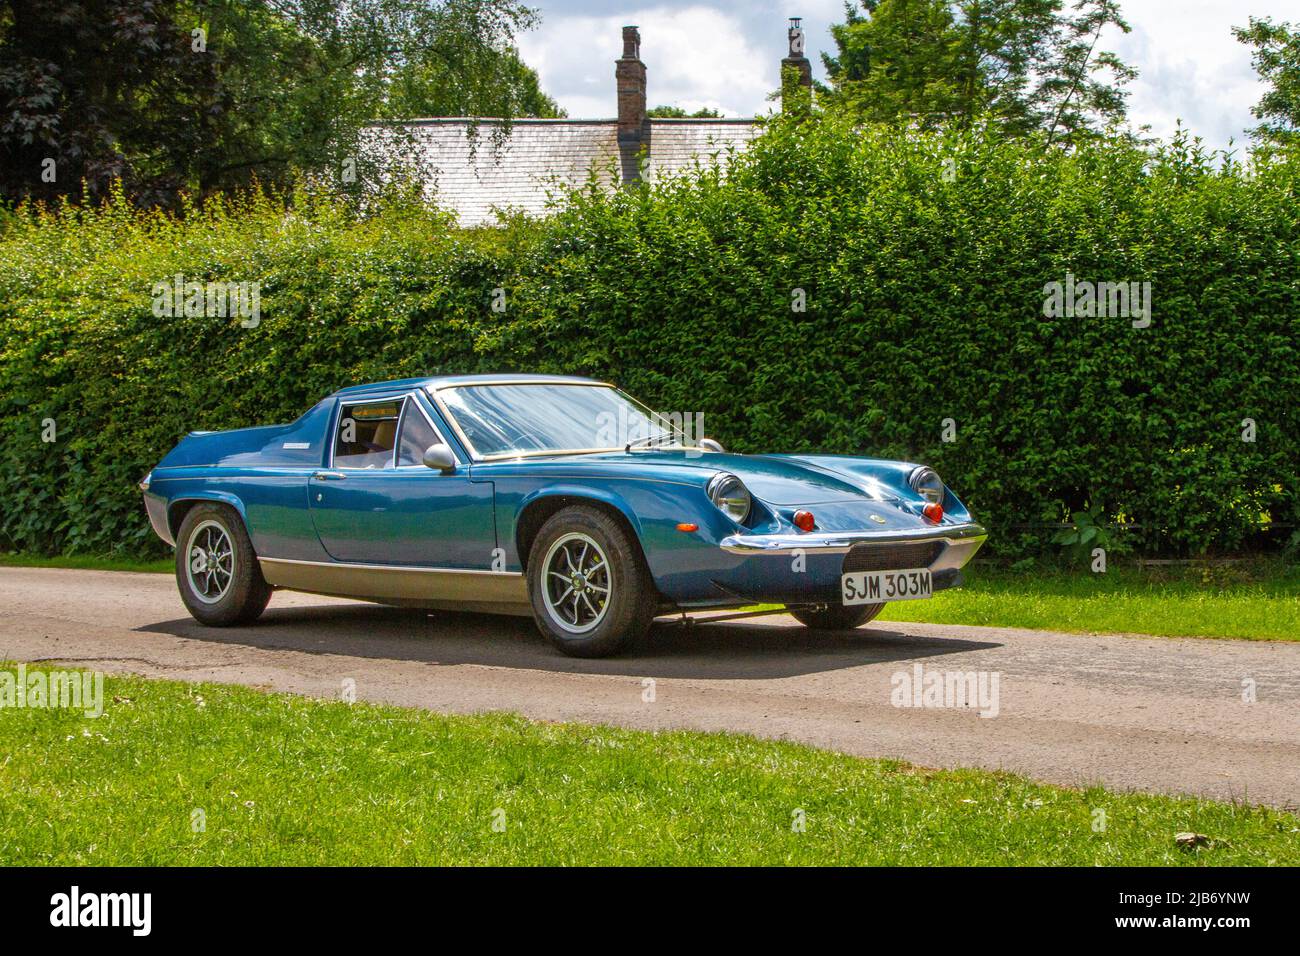 1973 70s seventies blue British Lotus Europa 1558 cc petrol sports car arriving in Worden Park Motor Village for the Leyland Festival, UK Stock Photo